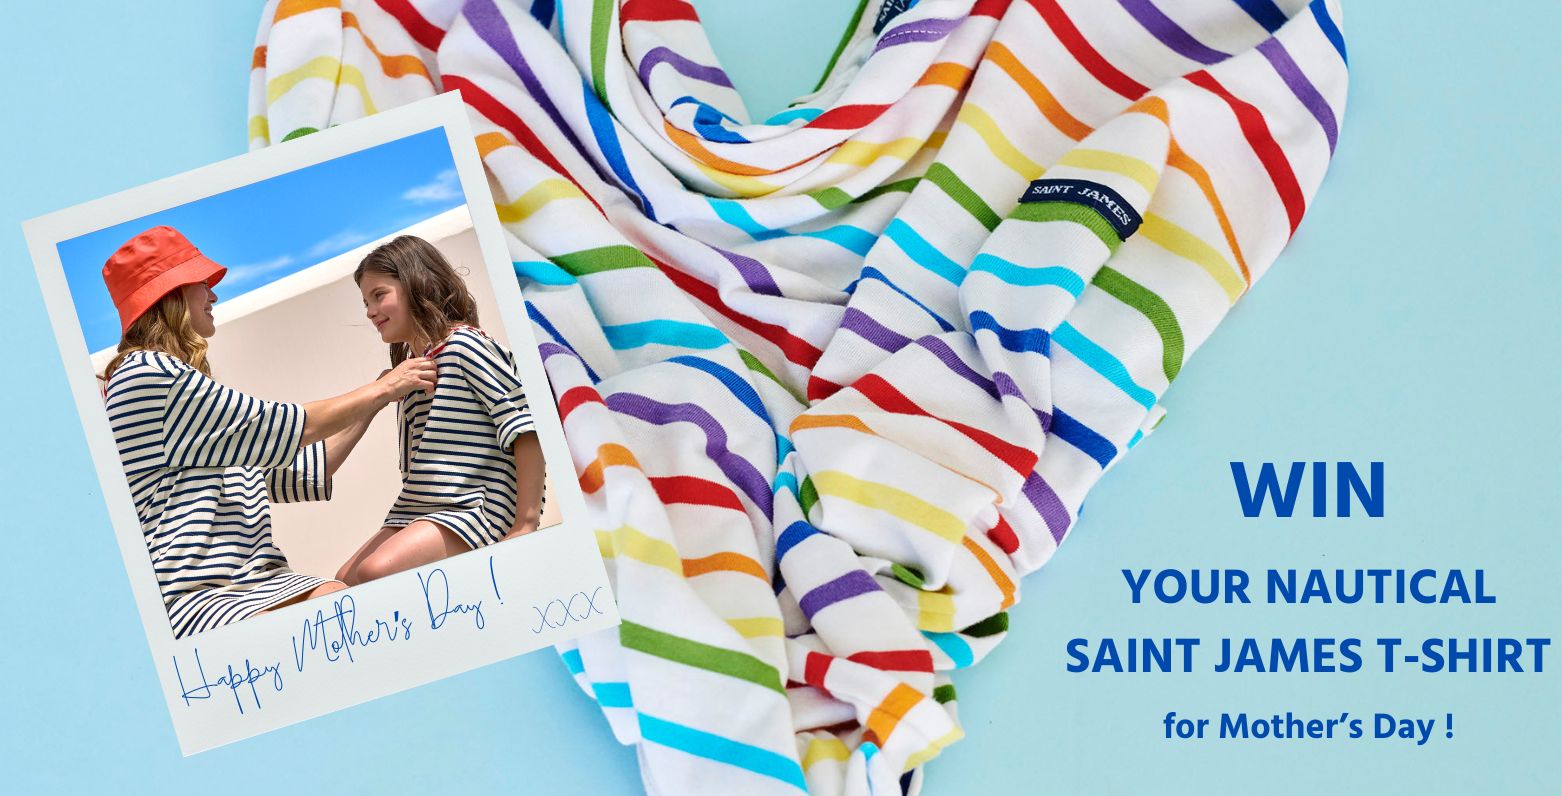 WIN YOUR SAINT JAMES NAUTICAL T-SHIRT FOR MOTHER'S DAY !